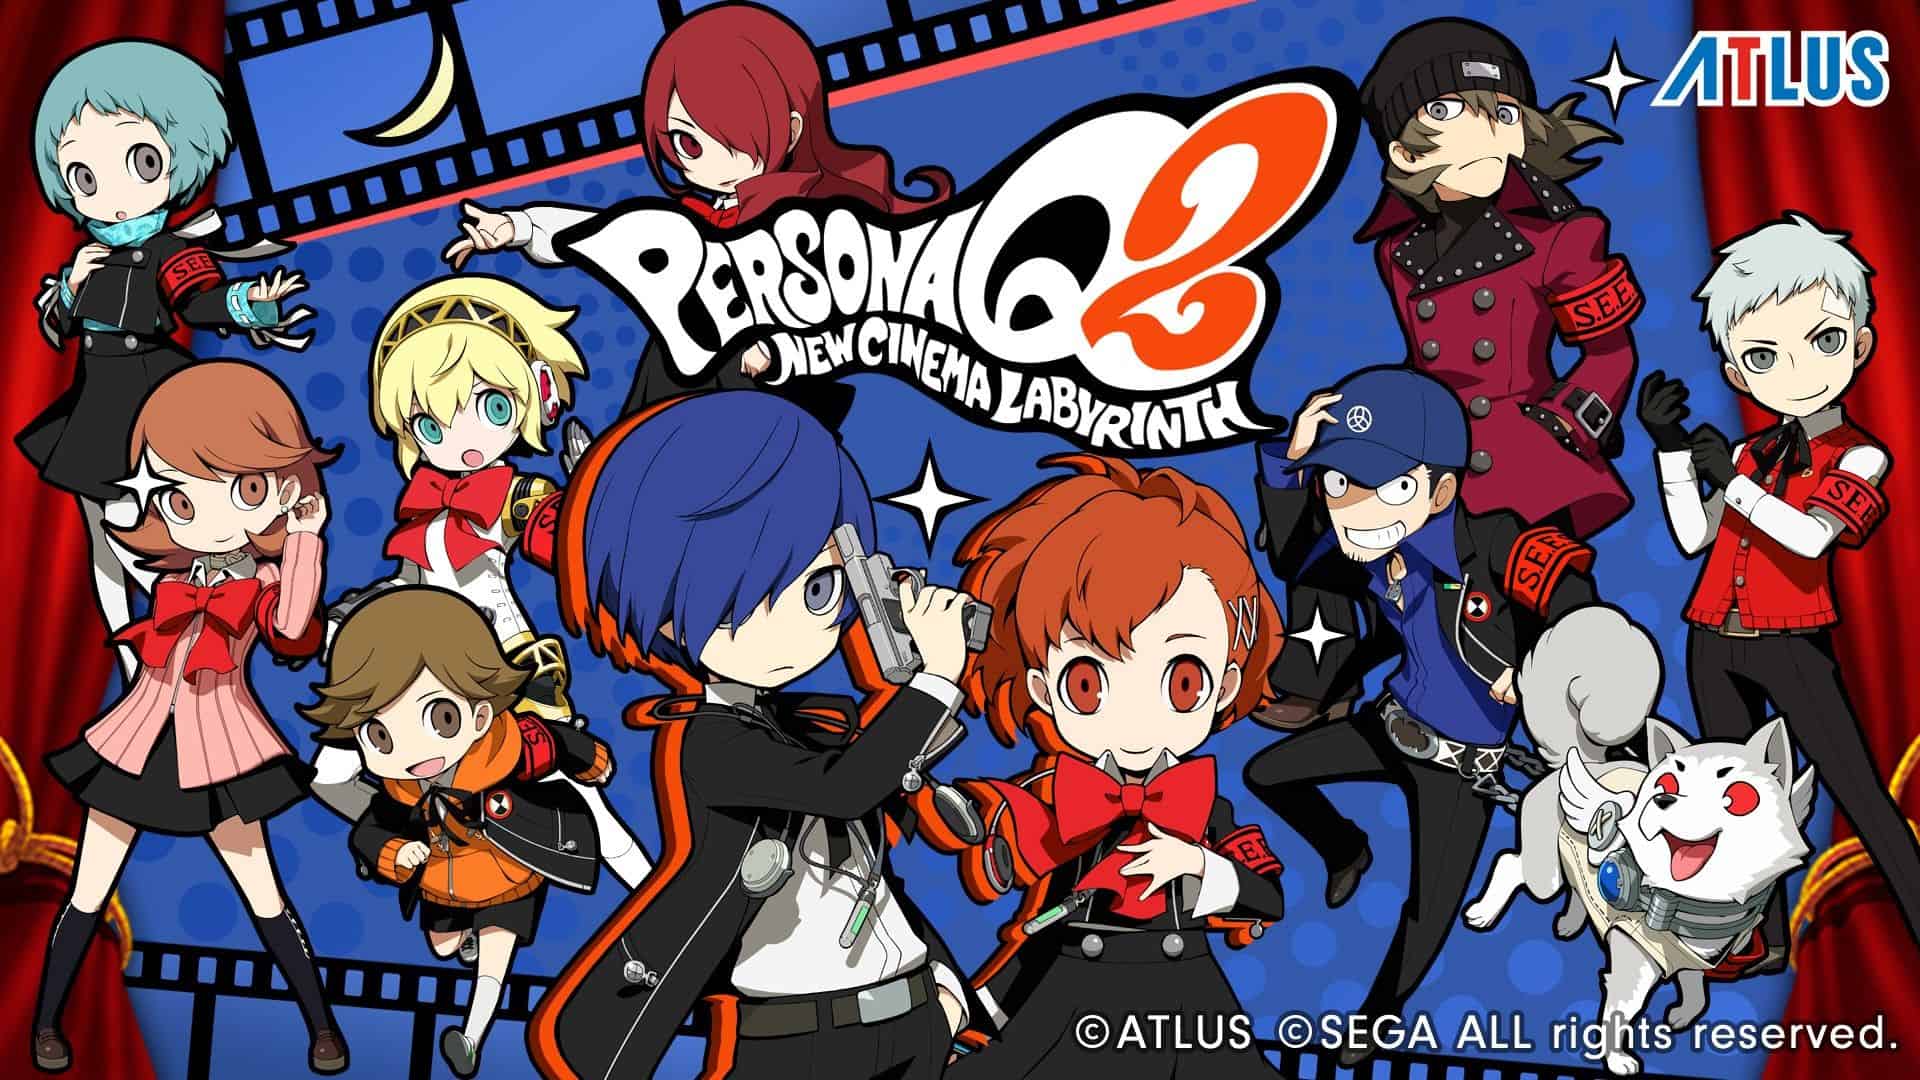 TRAILER: Persona Q2: New Cinema Labyrinth Out Now